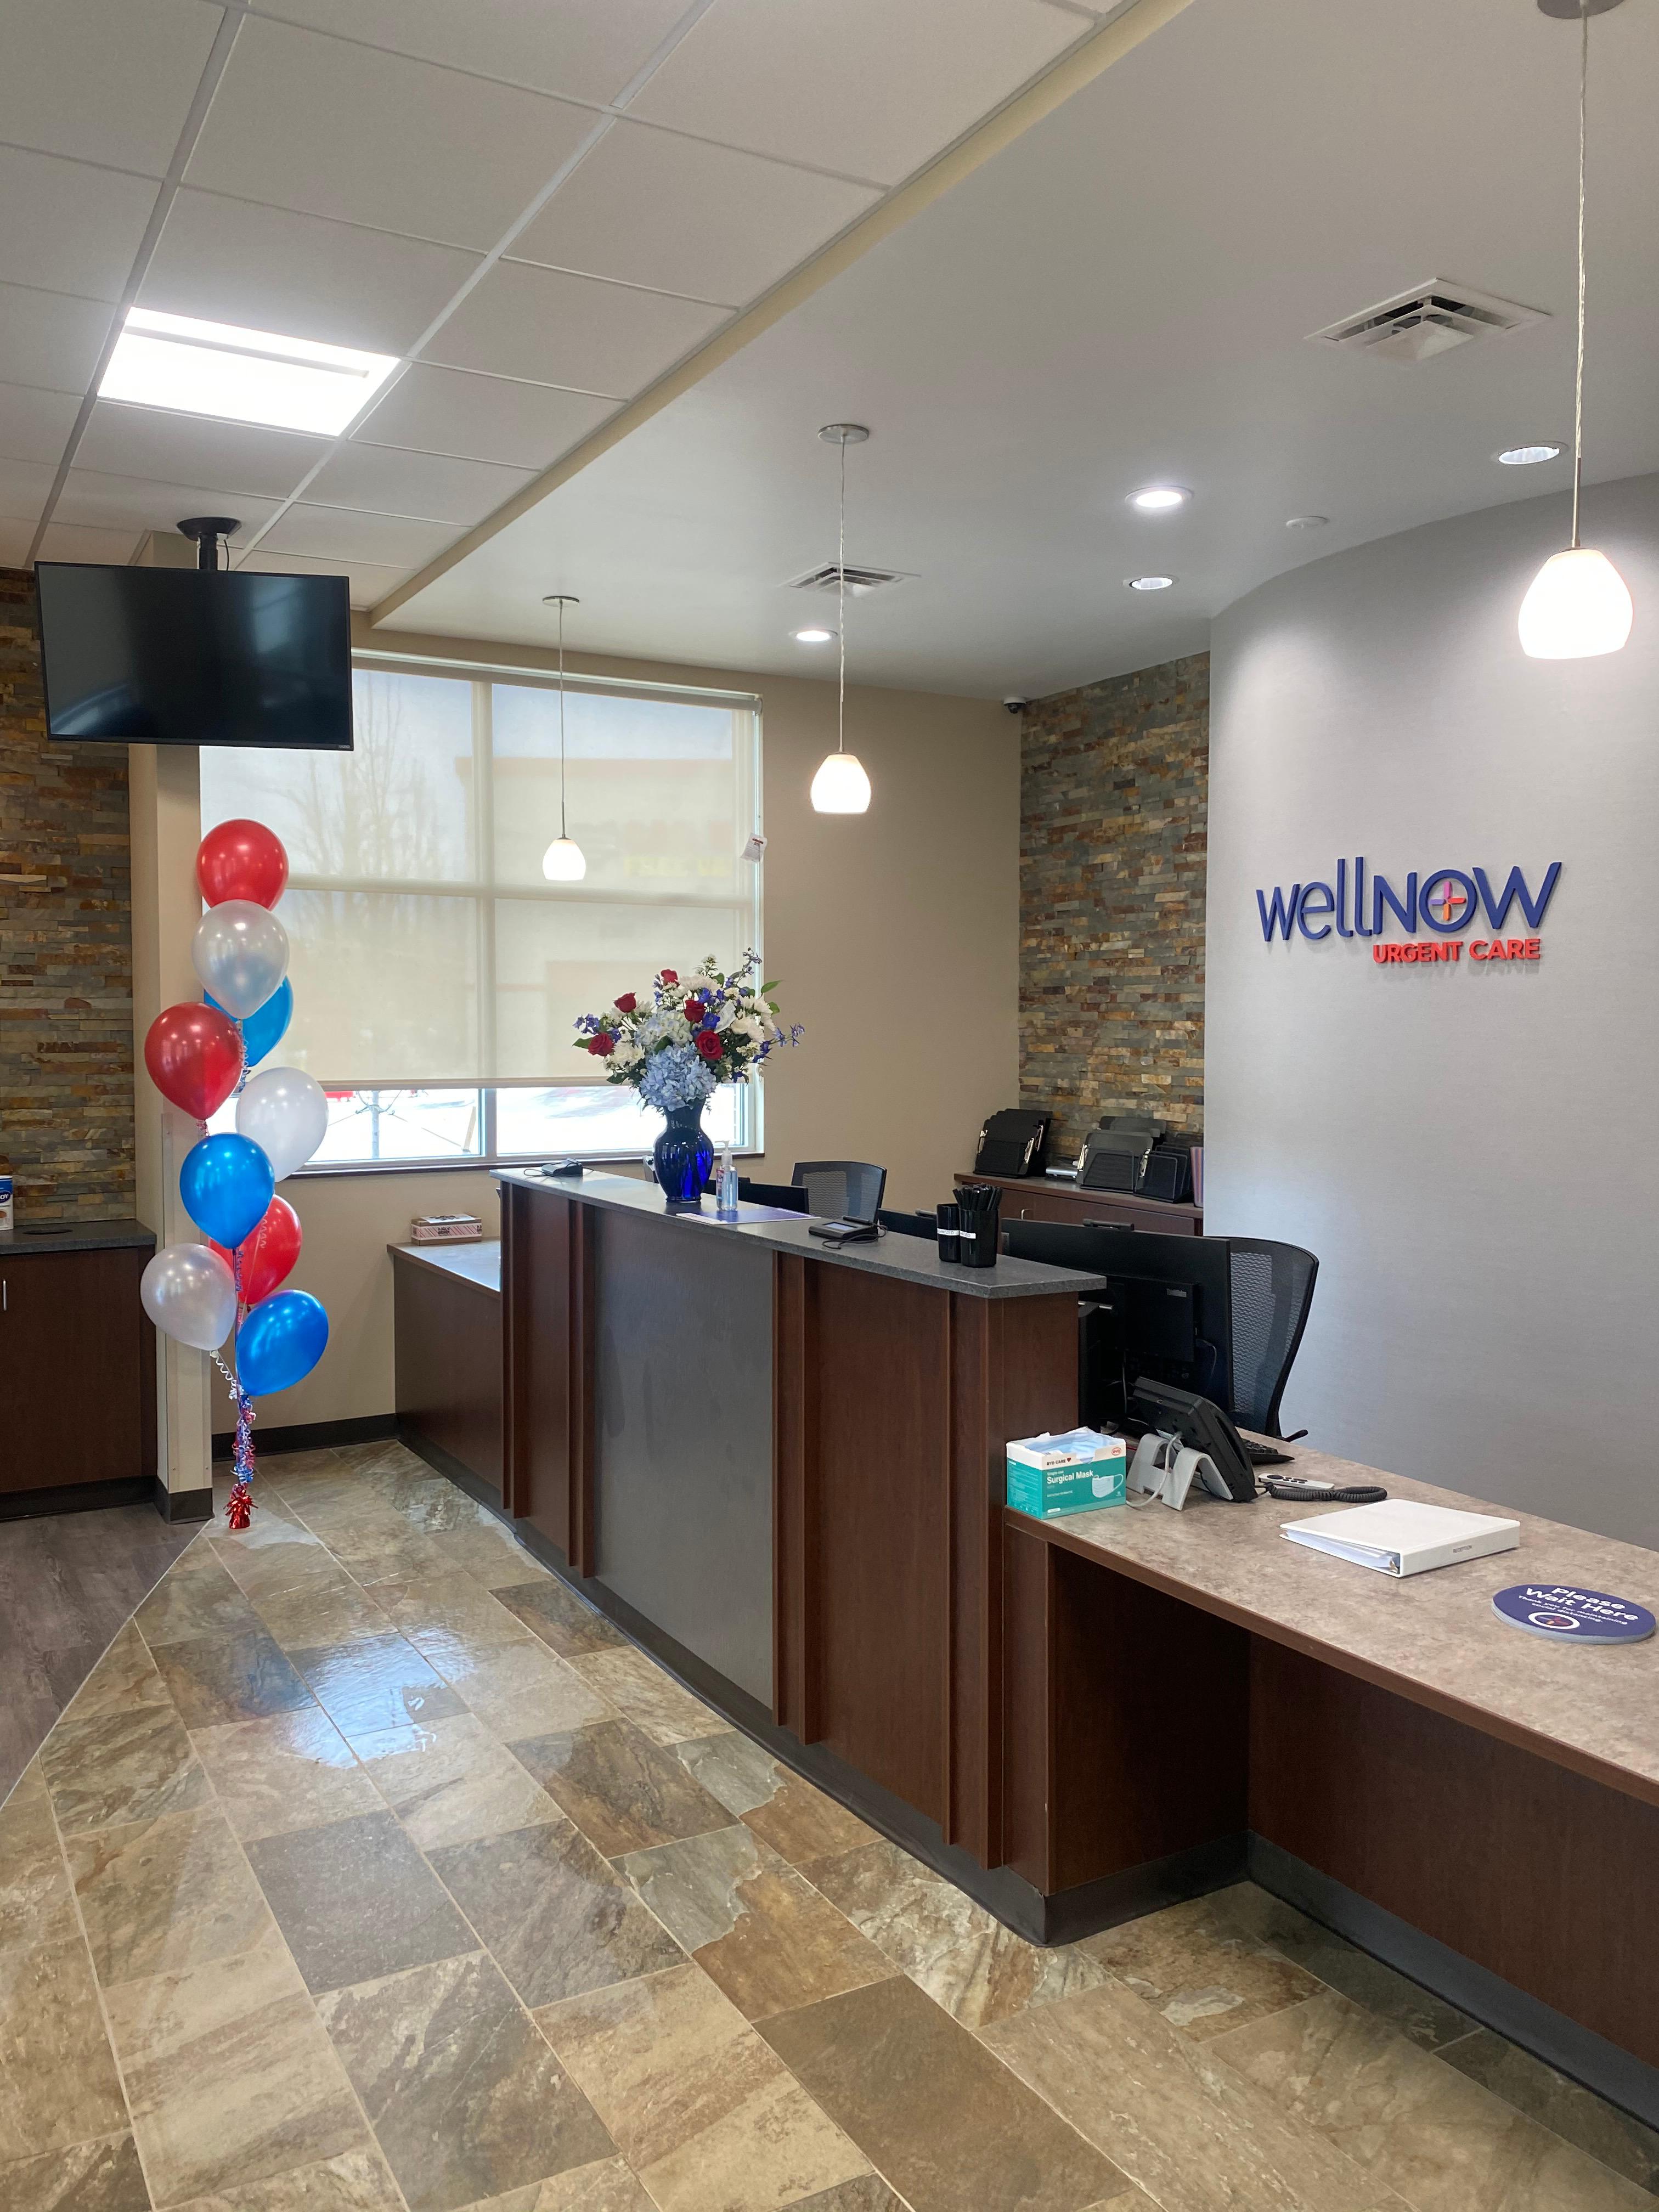 WellNow Urgent Care center provides immediate walk-in treatment for illnesses and injuries, wellness WellNow Urgent Care East Amherst (716)428-5545